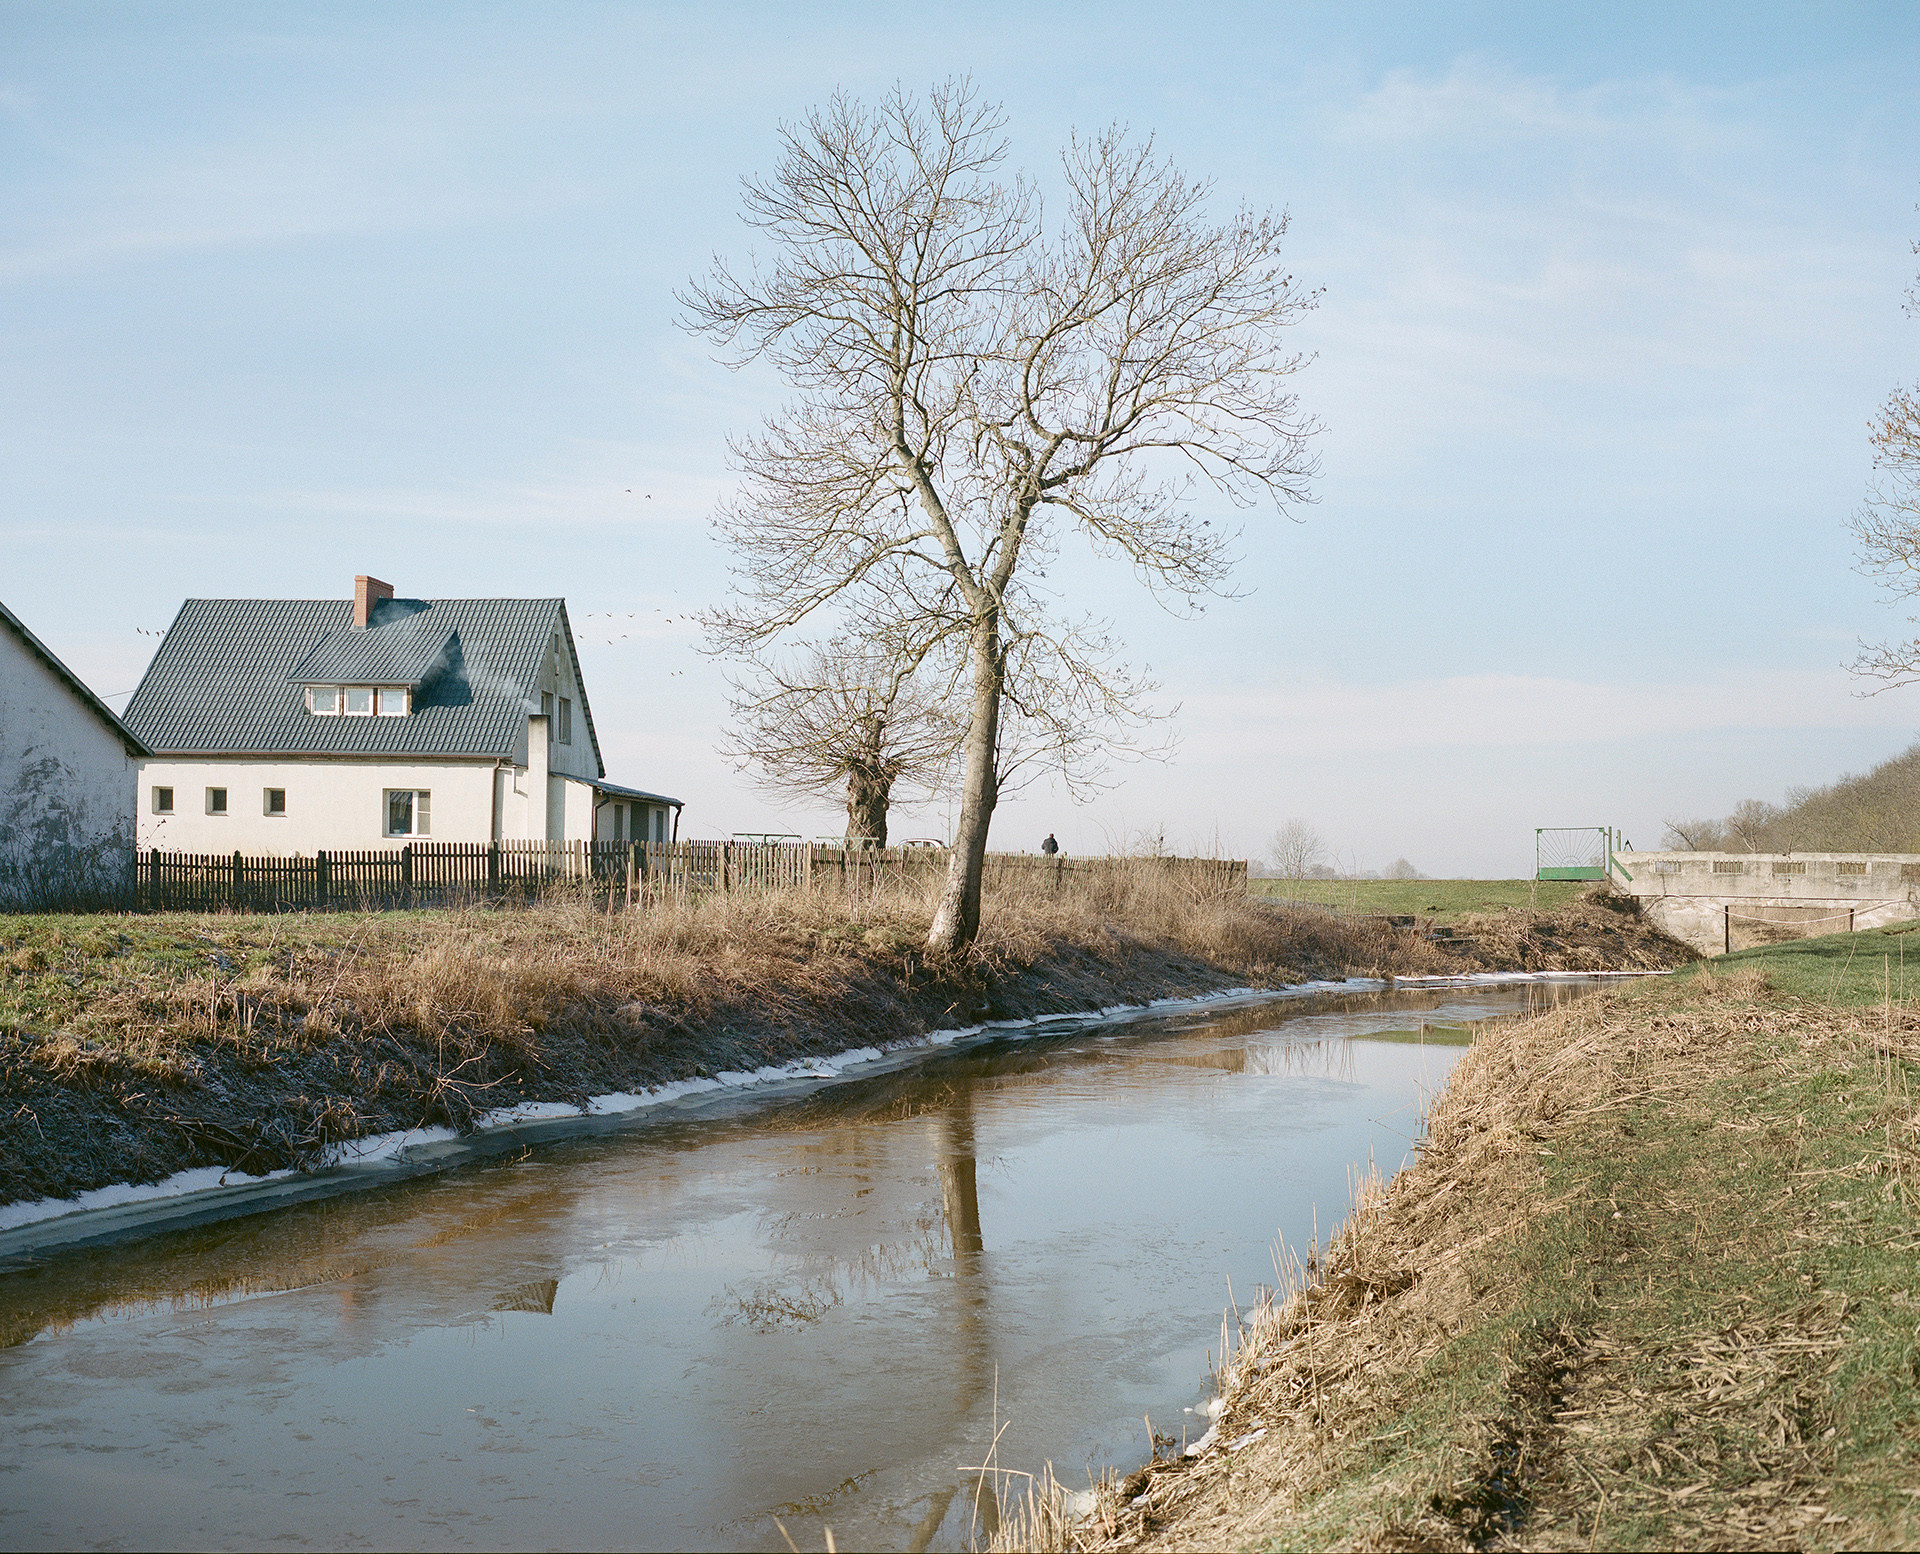 The farmstead of Żabczyn, Poland, formerly Neu-Amerika (‘New America’), stands on reclaimed land next to an artificial canal built as part of the Friderician colonization in the late 18th century